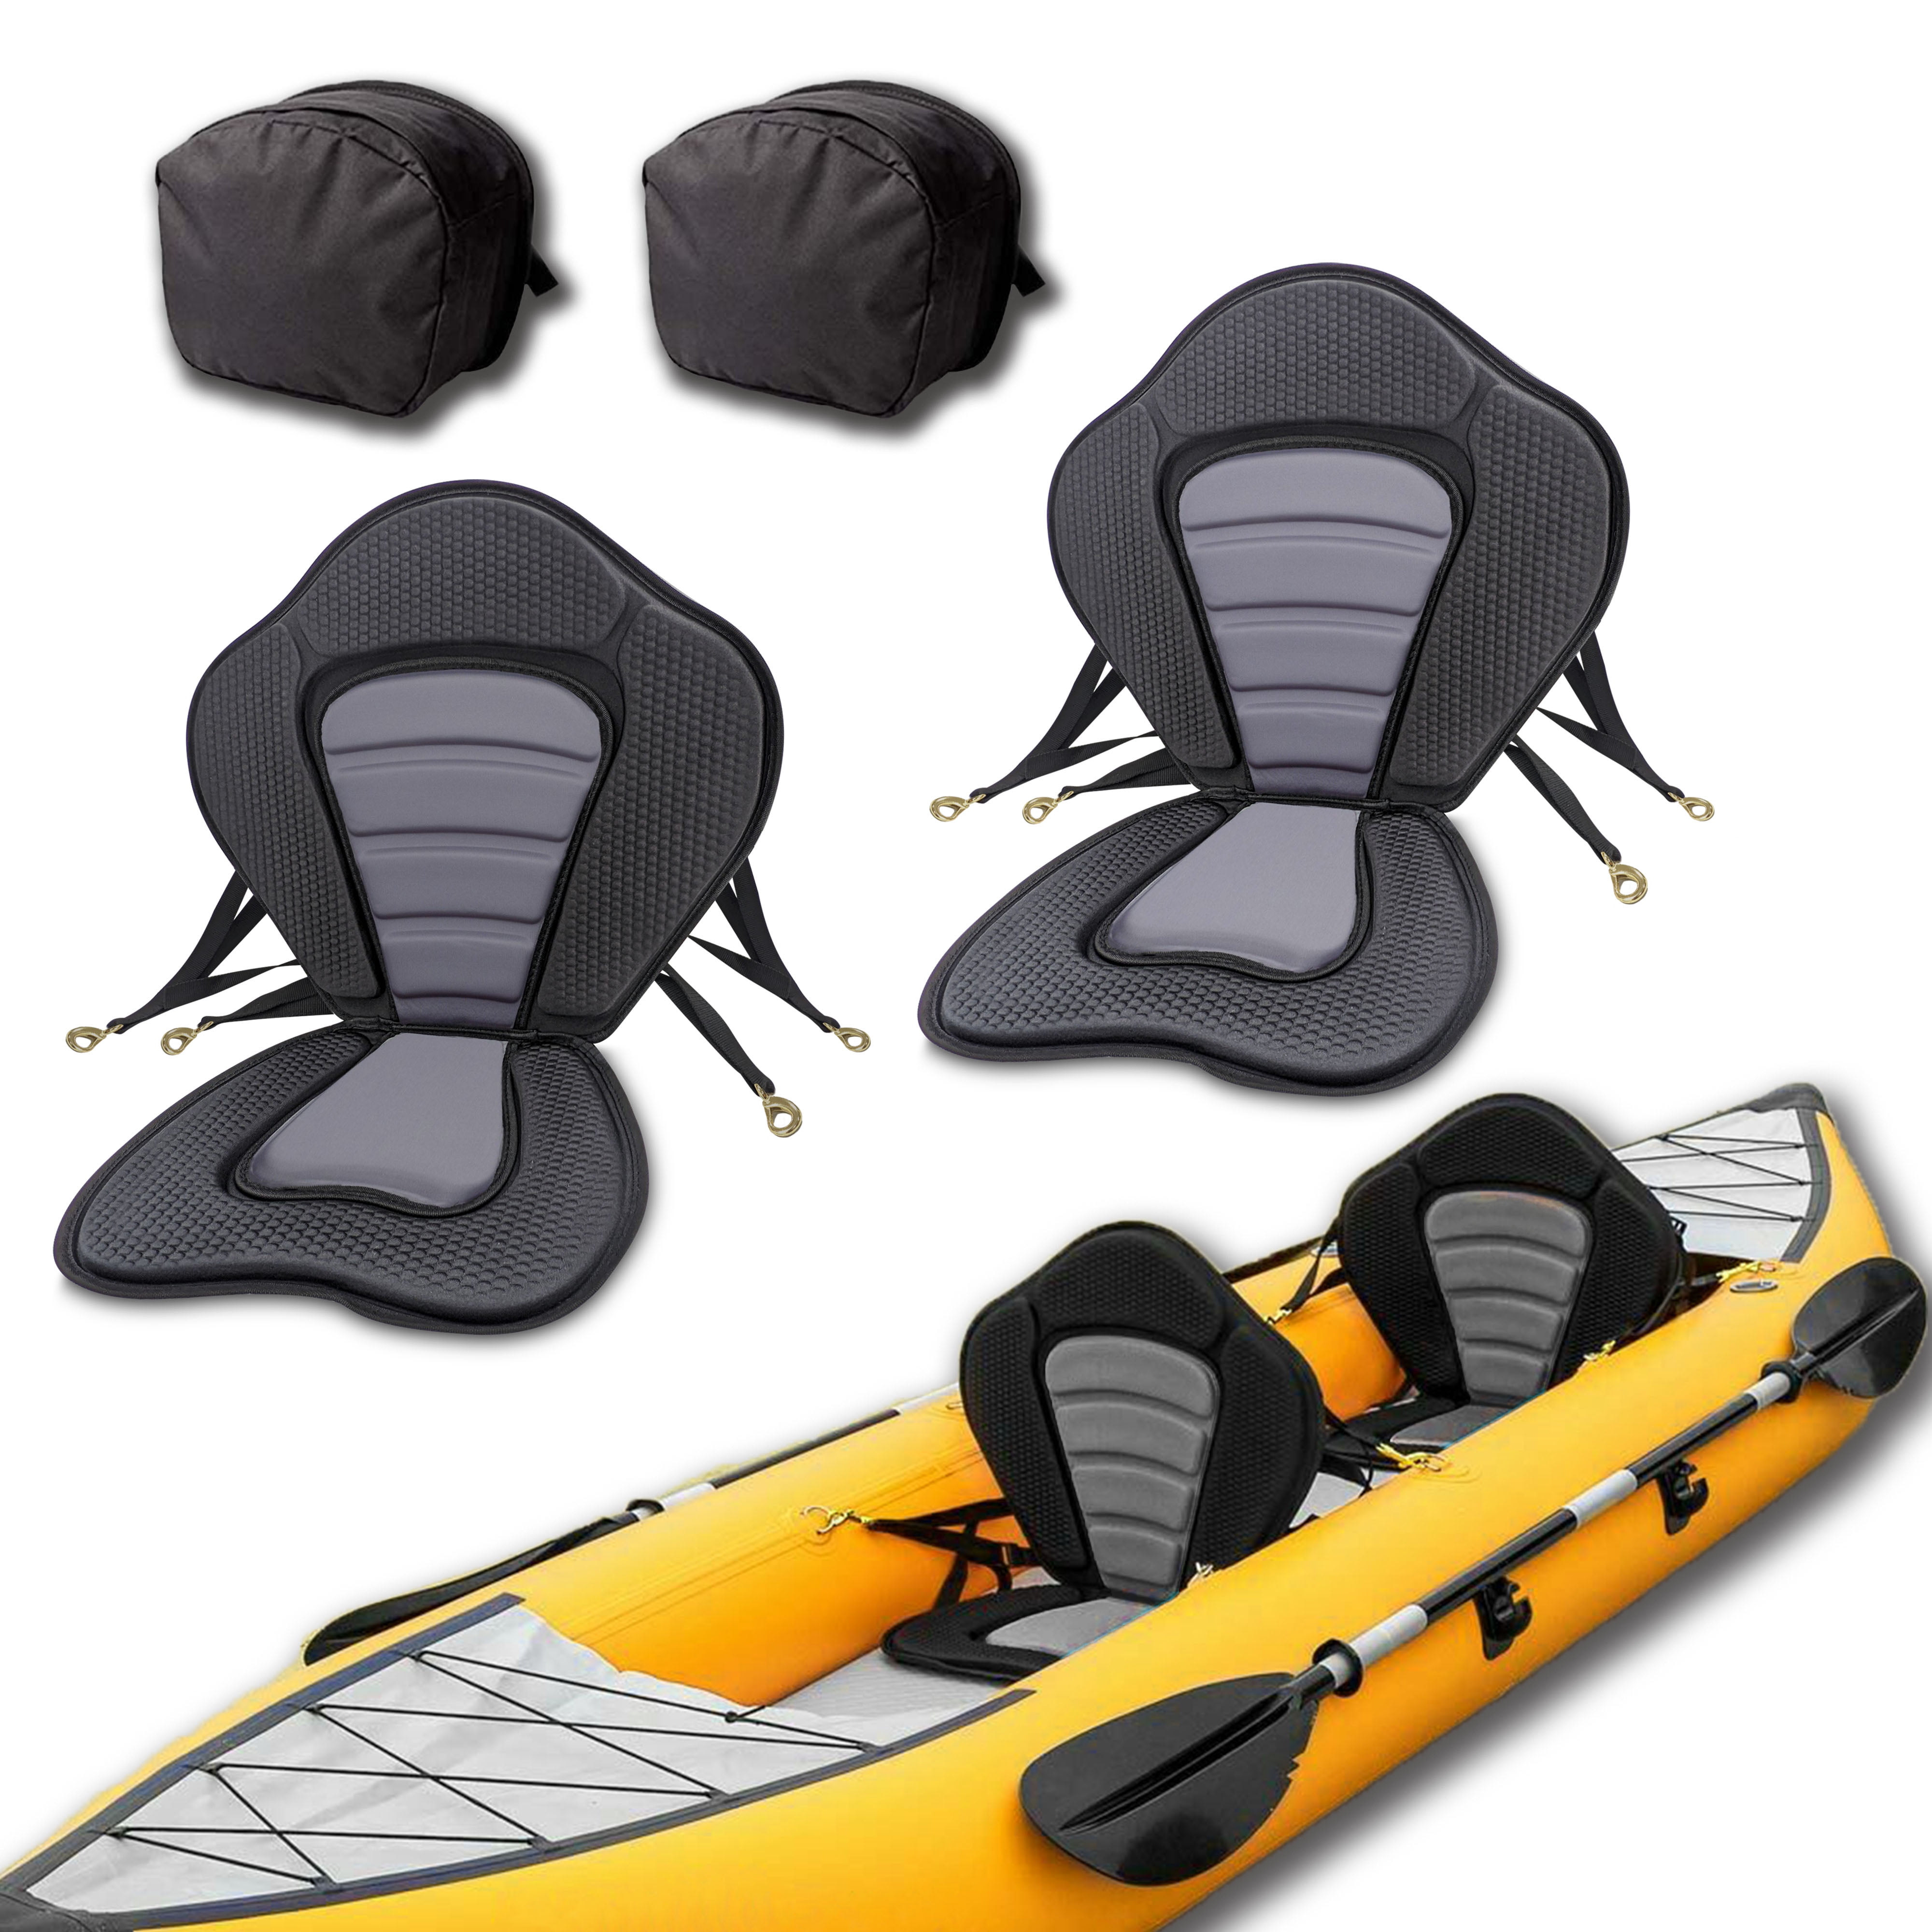 2 Pack Deluxe Padded Inside Kayak Seat with Back Support for sit on top for  Kayak and Inflatable Stand Up Paddle Board, Fishing Boat Seat. Detachable